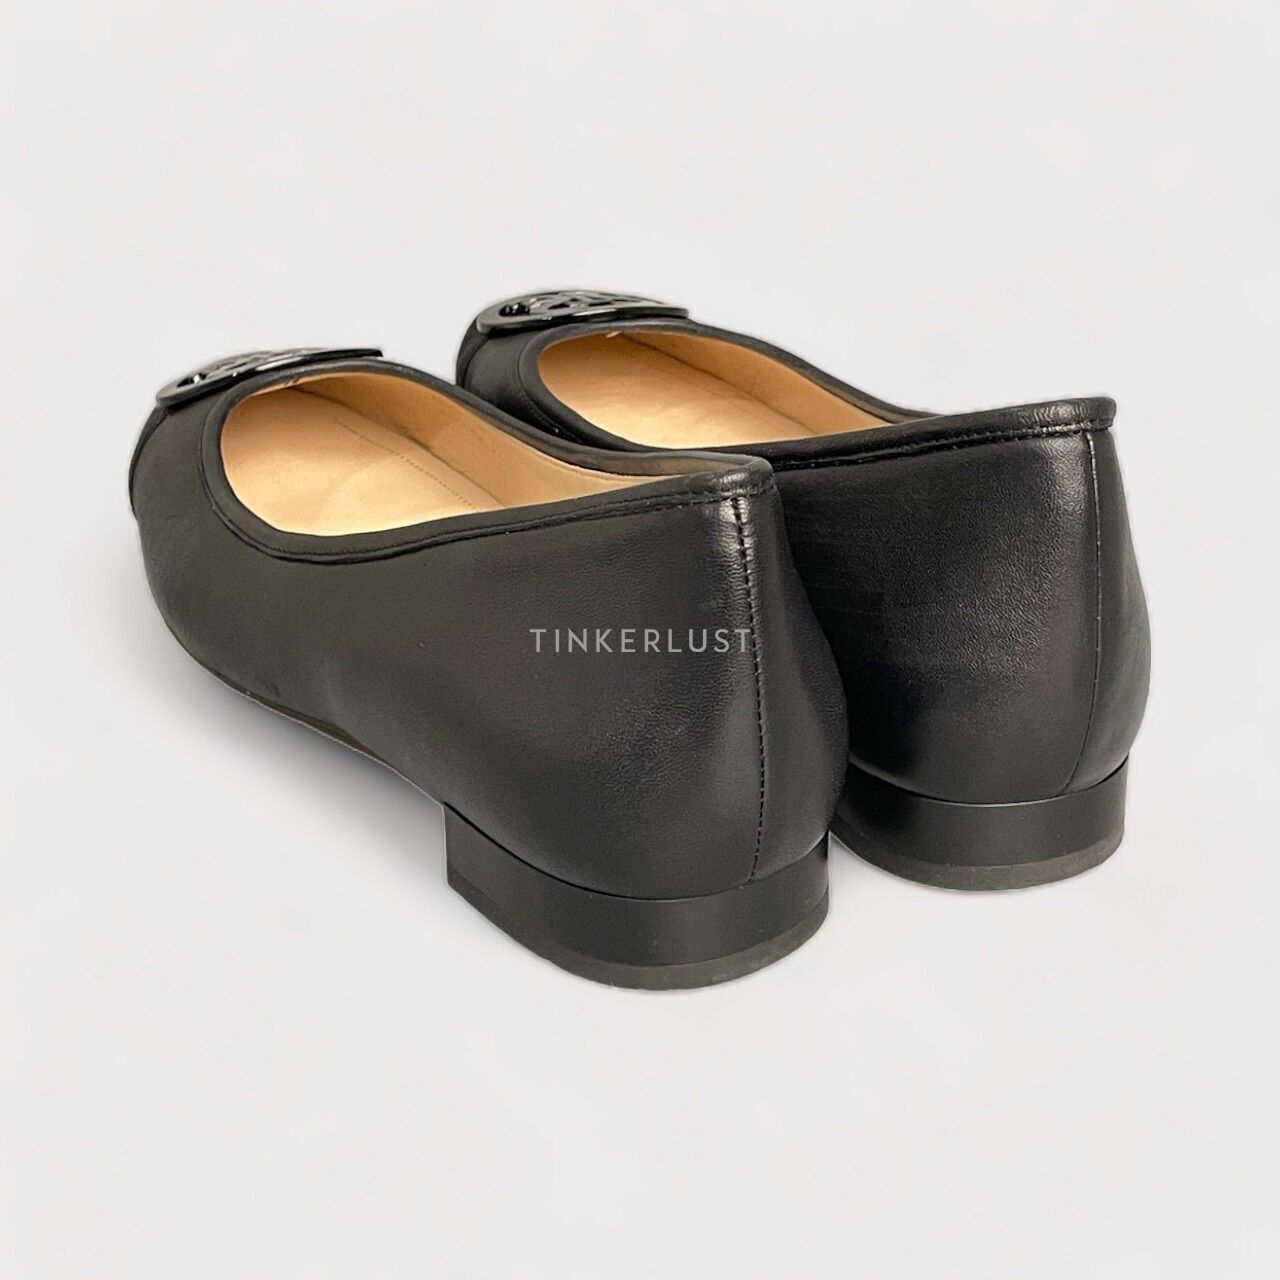 Staccato Black Flats Shoes